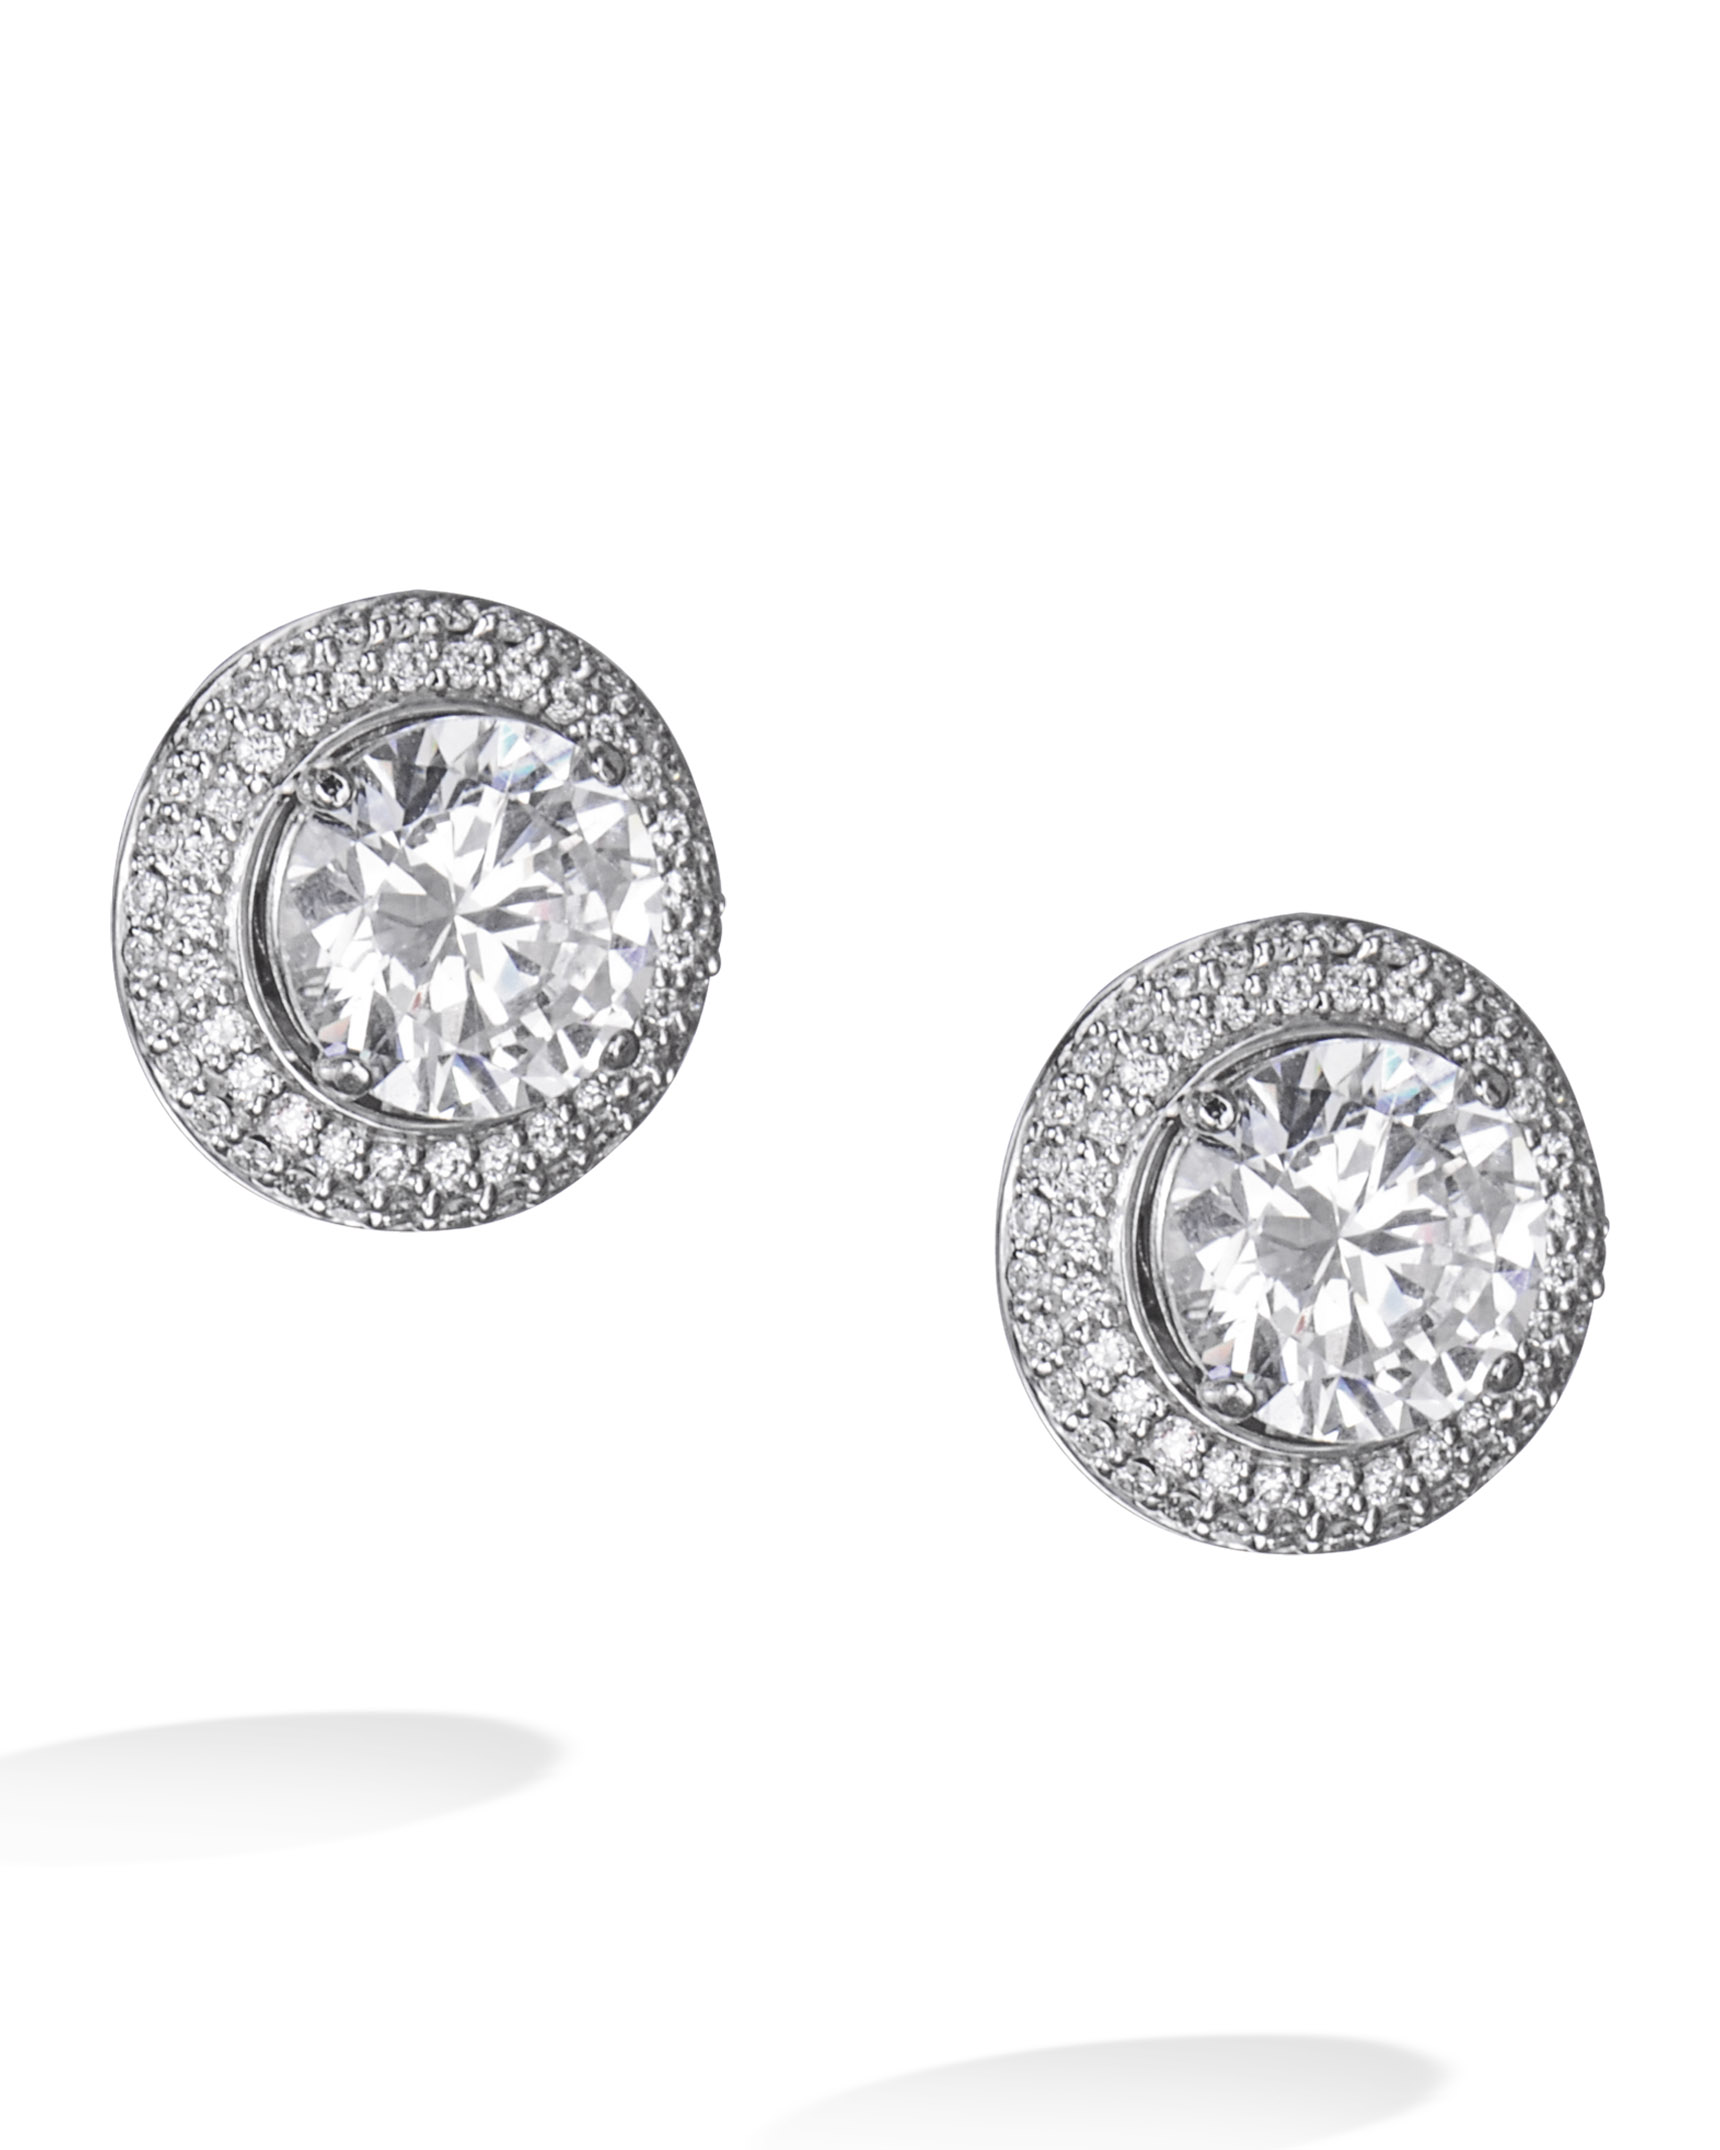 0.25 Carat White Gold Diamond Removable Jackets for Stud Earrings